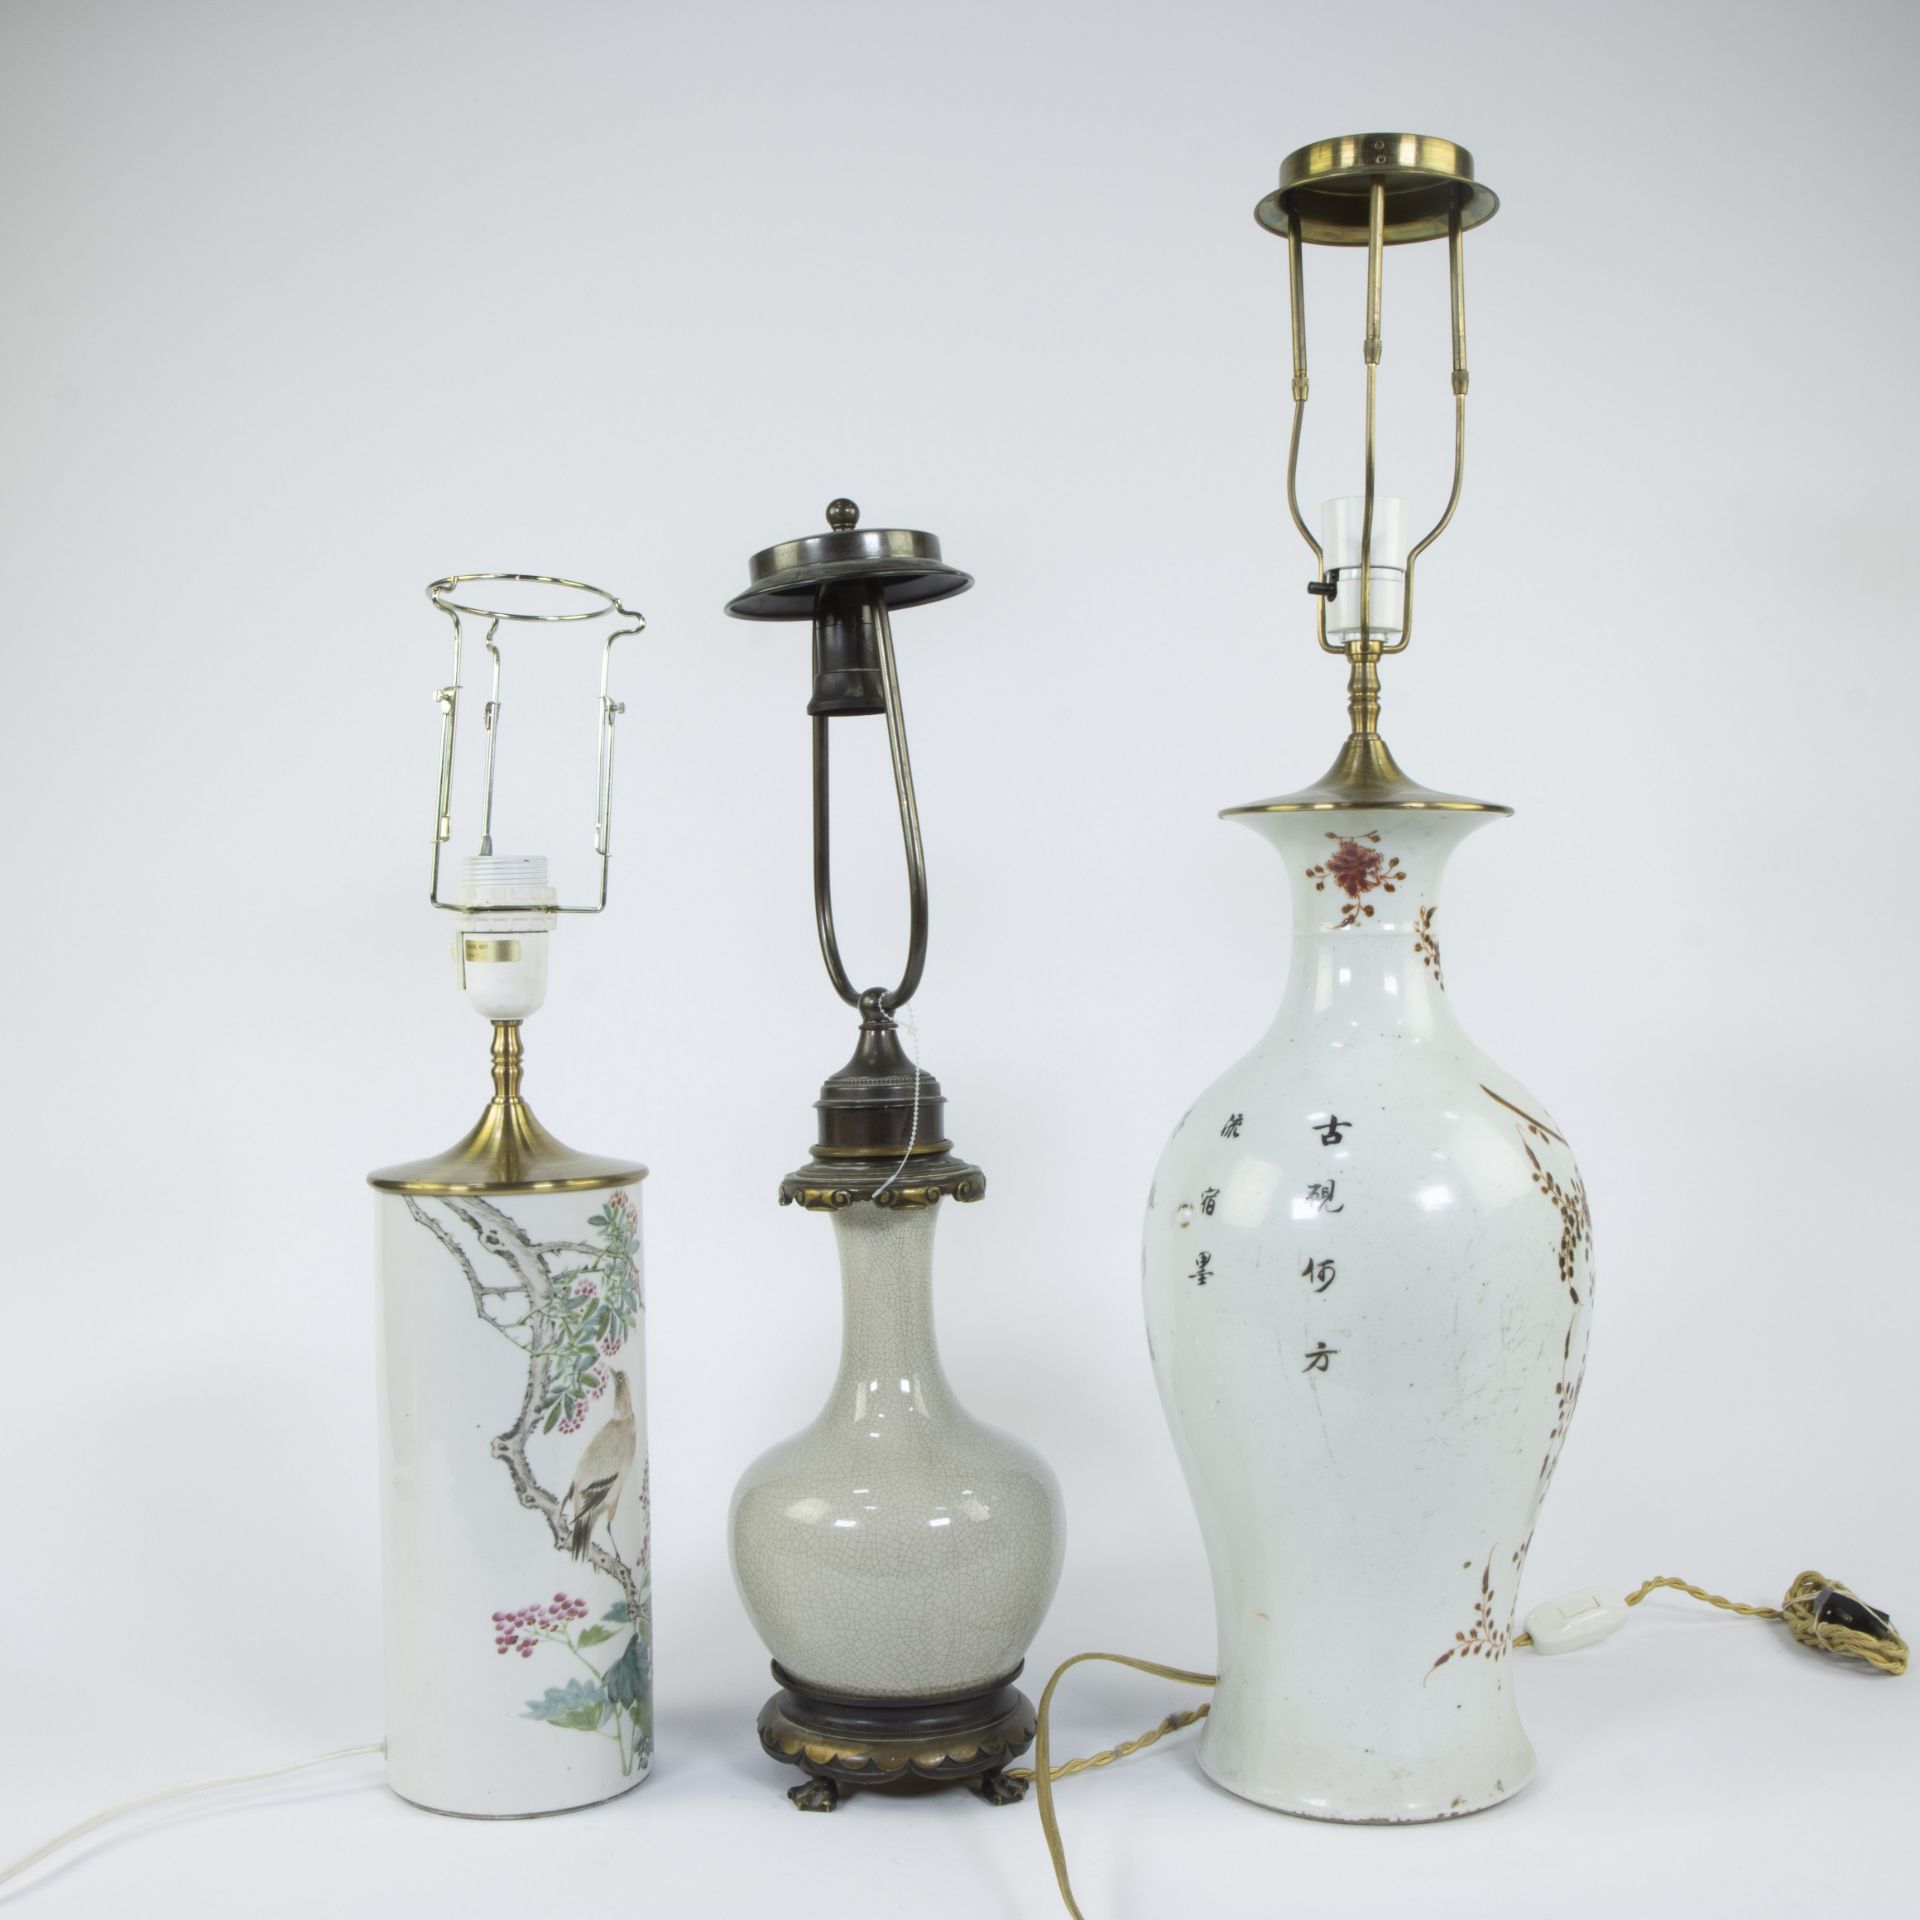 Collection of 3 Chinese vases transformed into lampadaires - Image 4 of 5